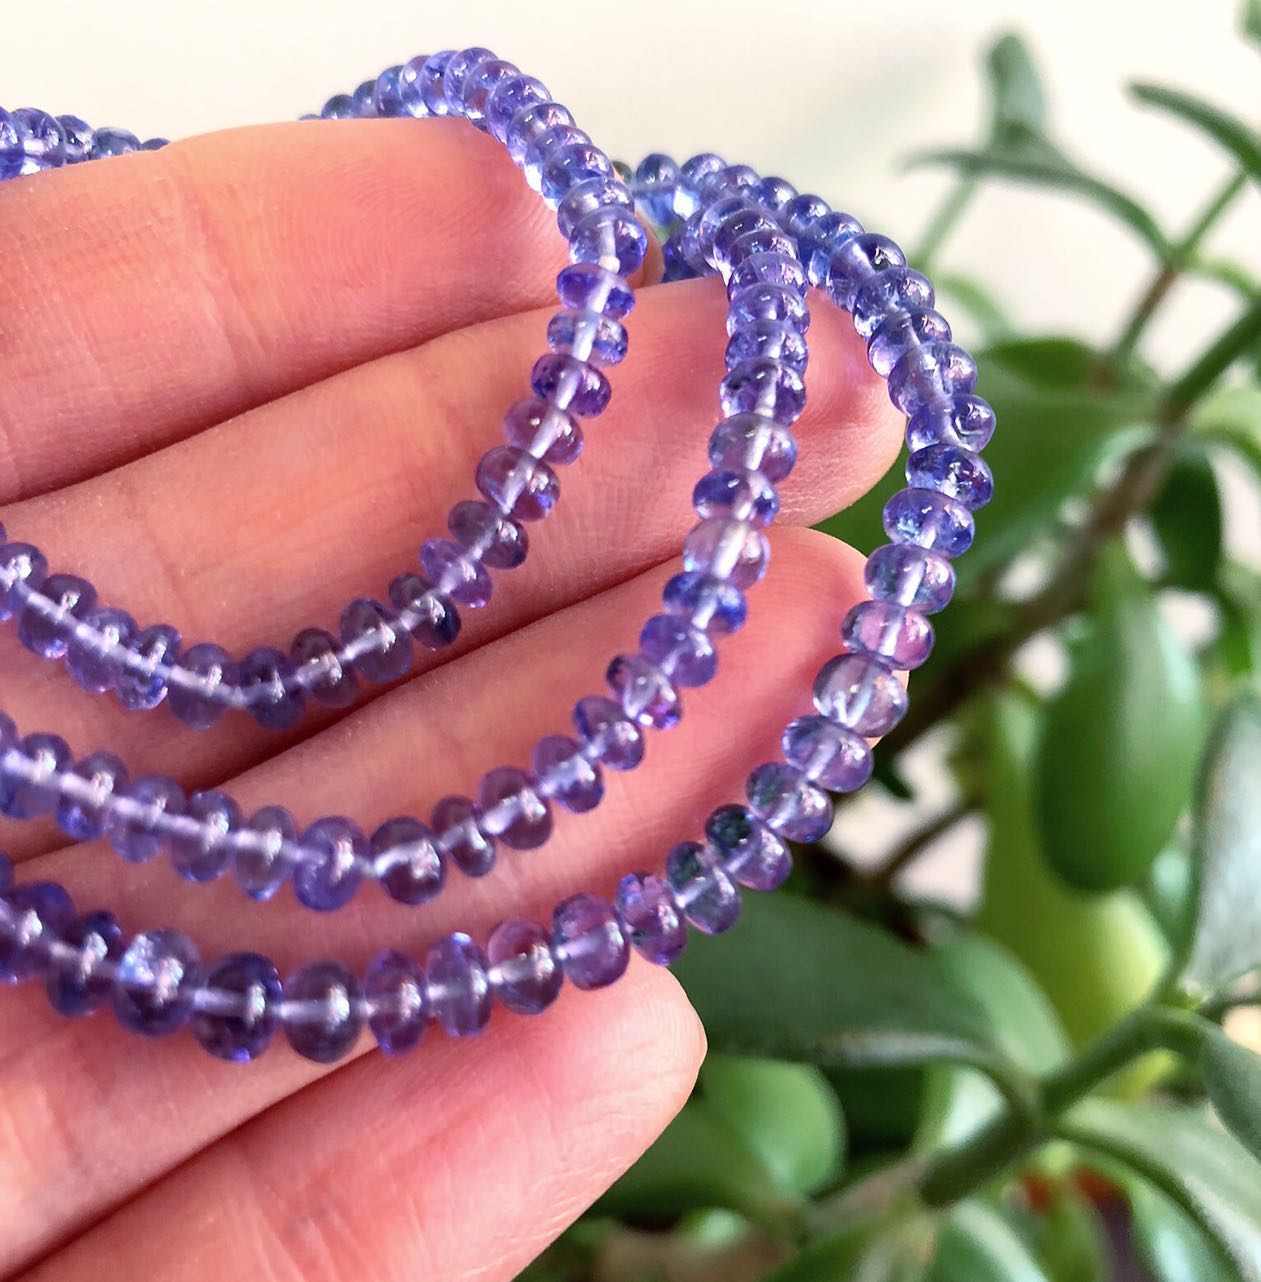 Crystal healing Tanzanite necklace known for giving you access to your deepest soul wisdom